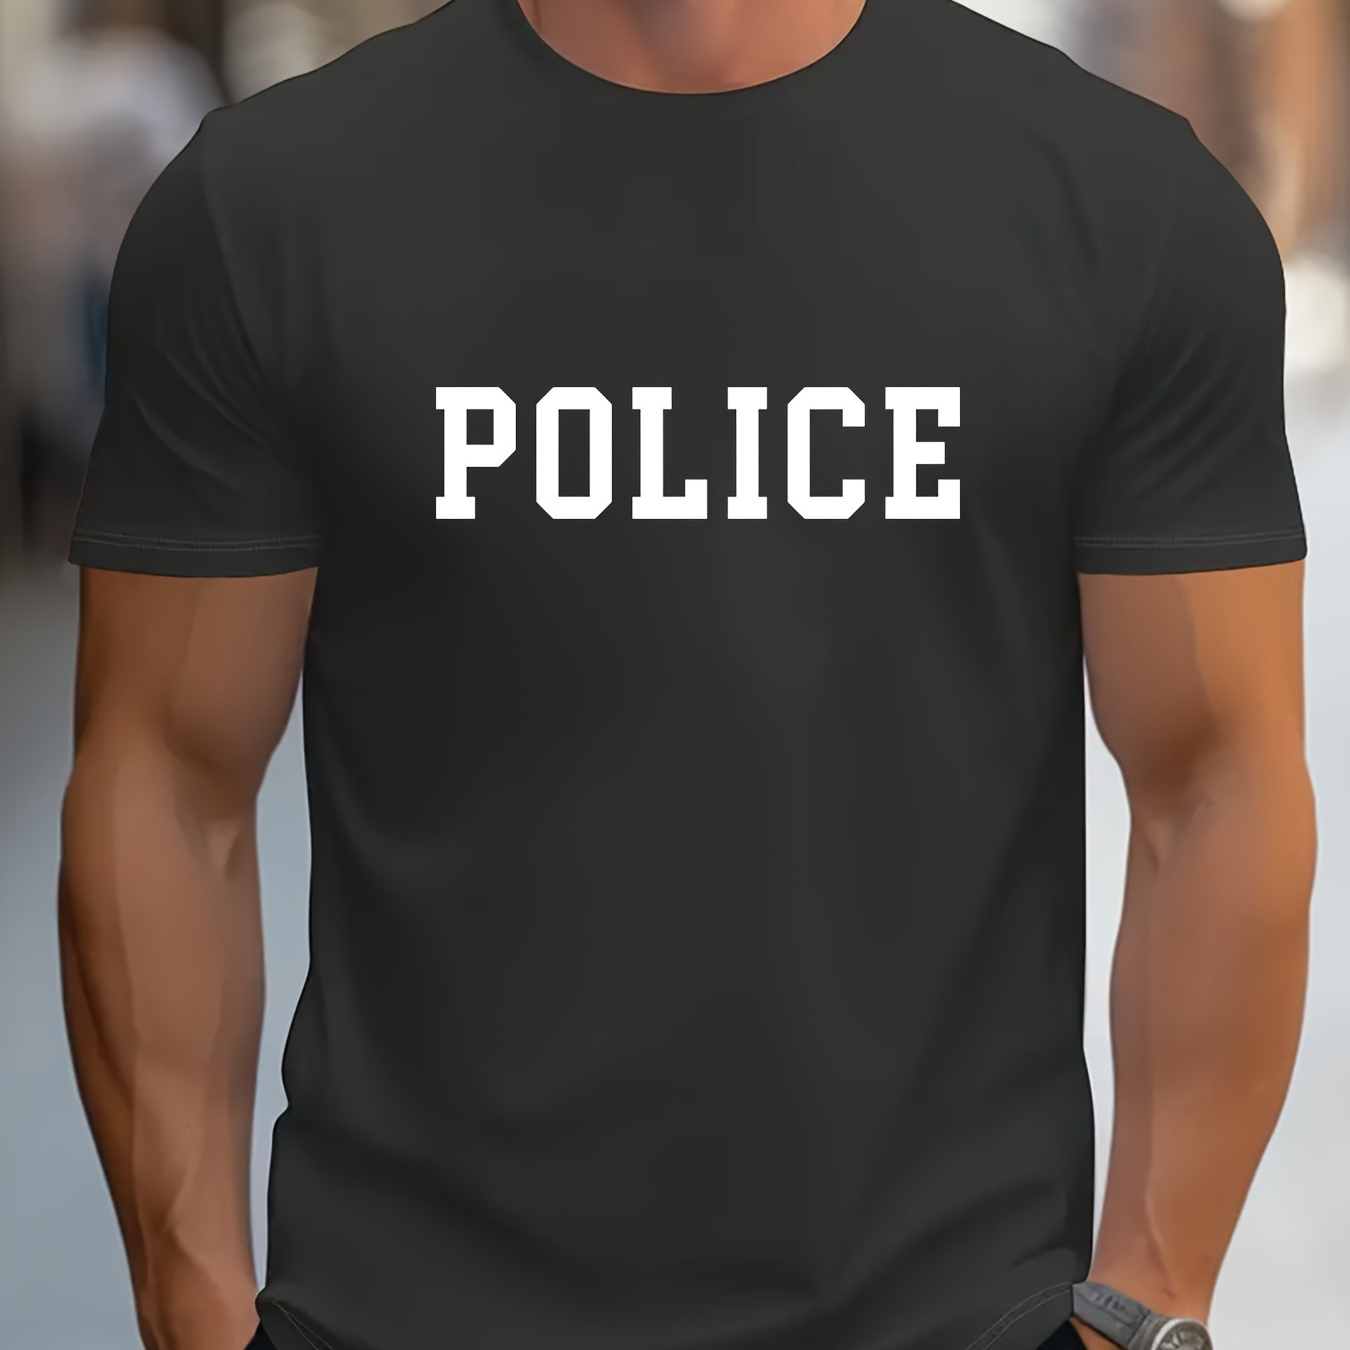 

Police Letter Graphic Print Men's Creative Top, Casual Short Sleeve Crew Neck T-shirt, Men's Clothing For Summer Outdoor